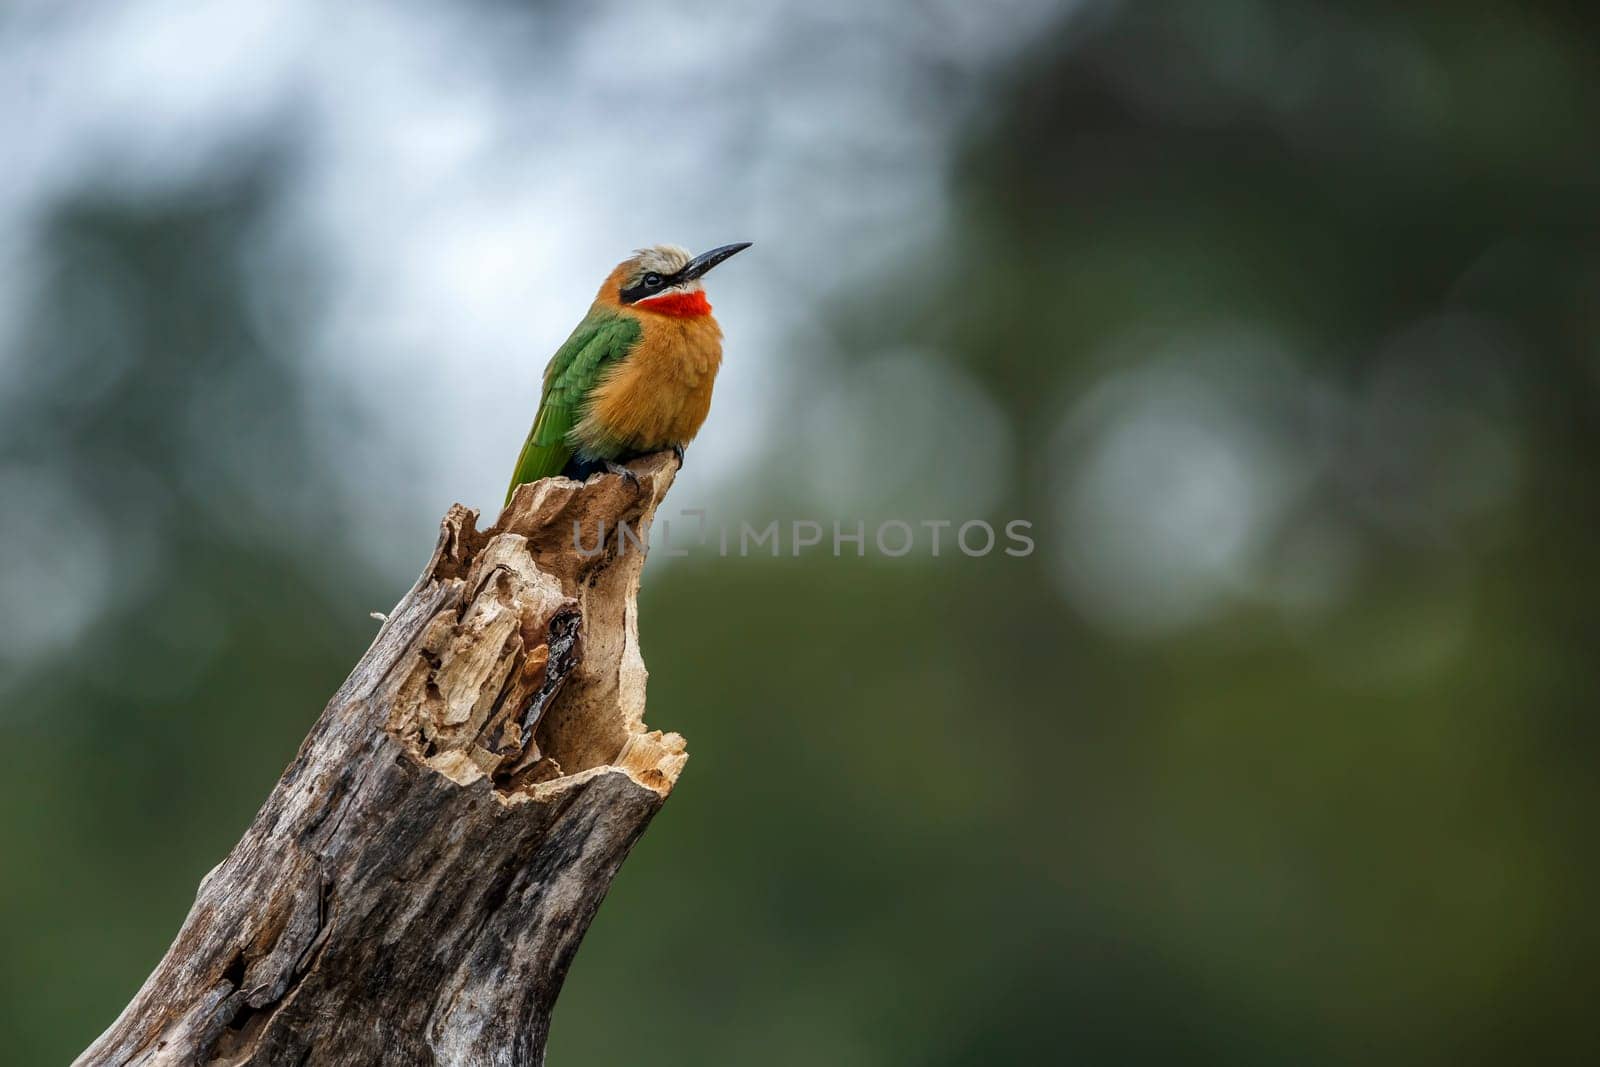 White fronted Bee eater standing on a log in Kruger National park, South Africa ; Specie Merops bullockoides family of Meropidae